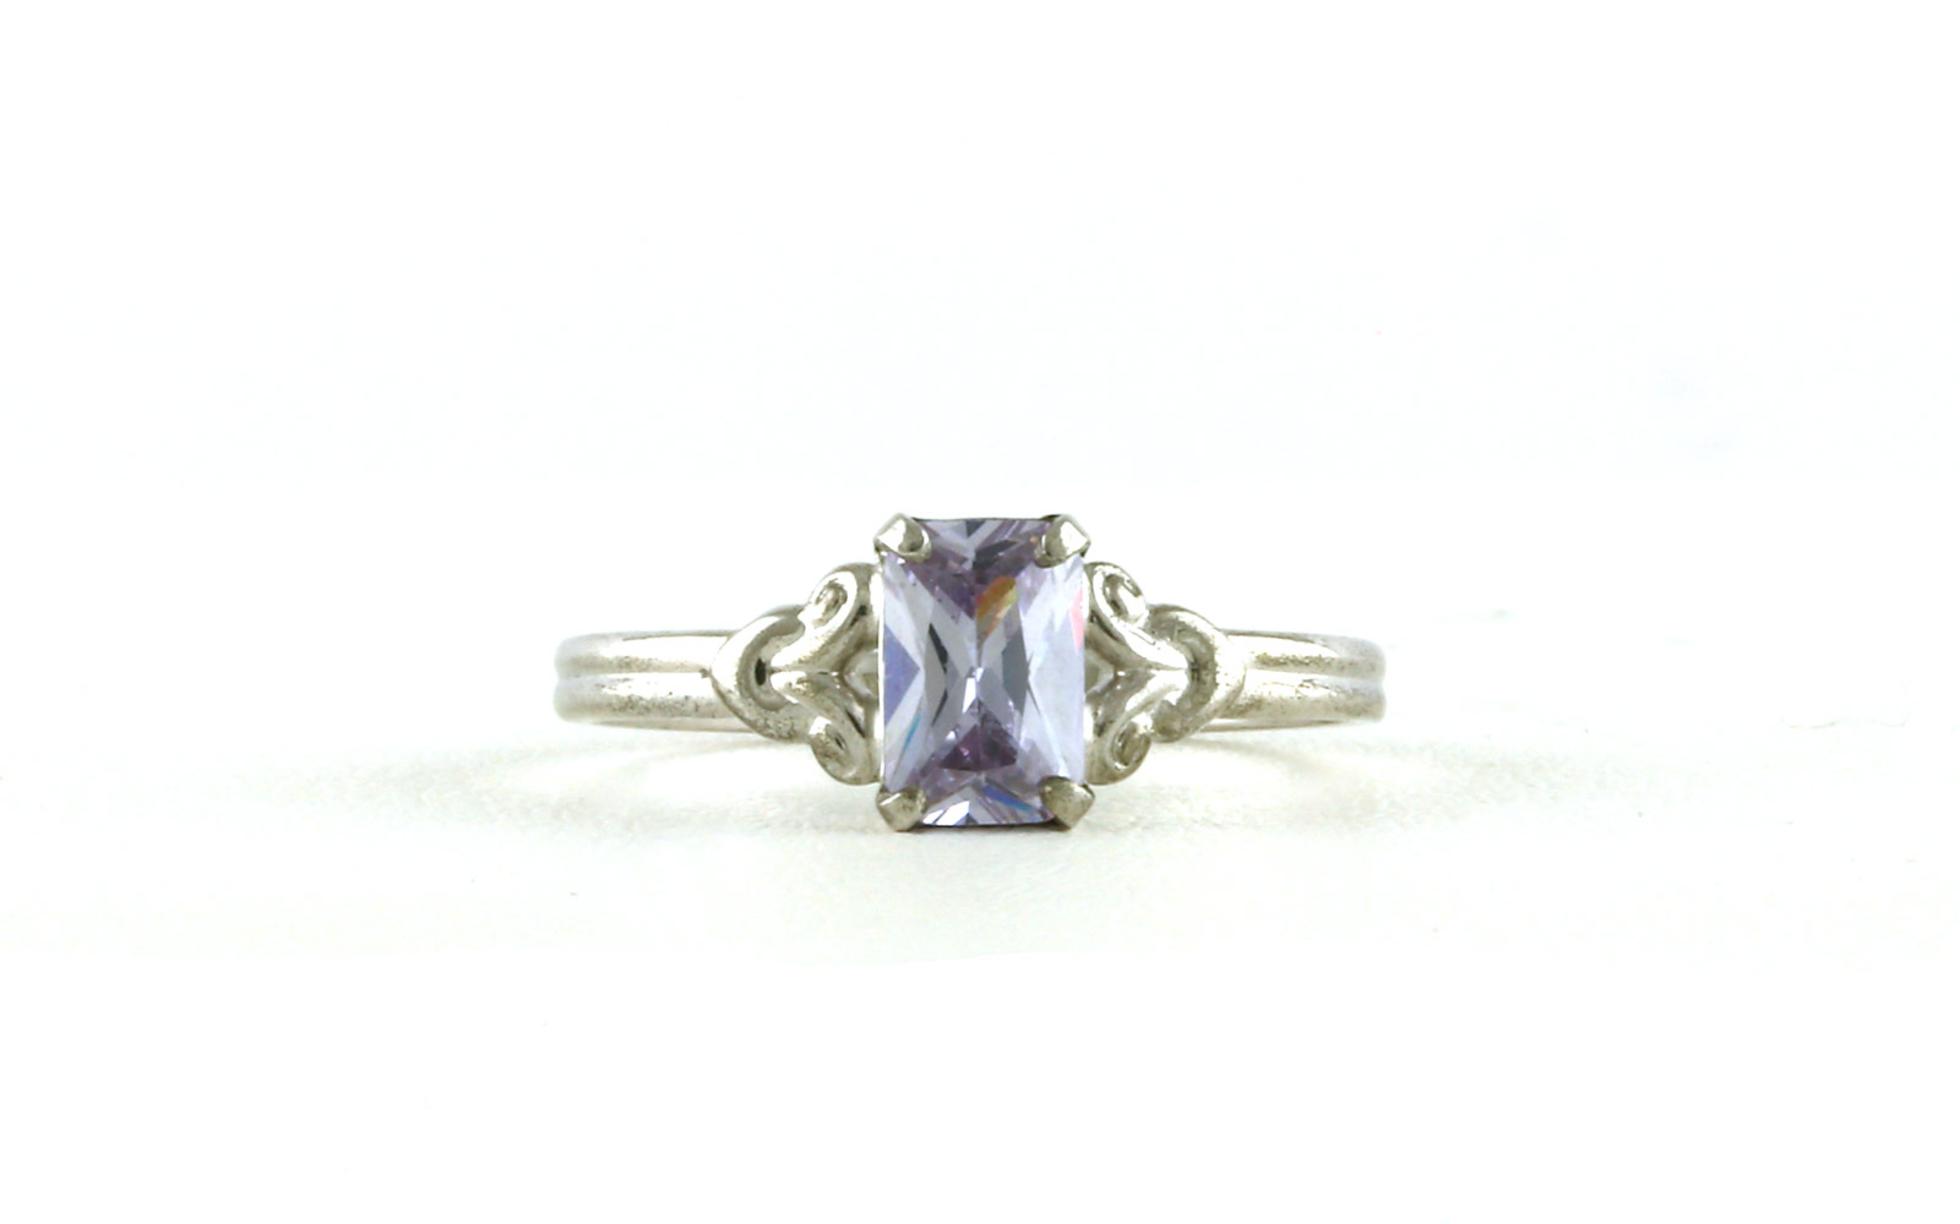 Children's Emerald-cut Synthetic Alexandrite Birthstone Ring in Sterling Silver